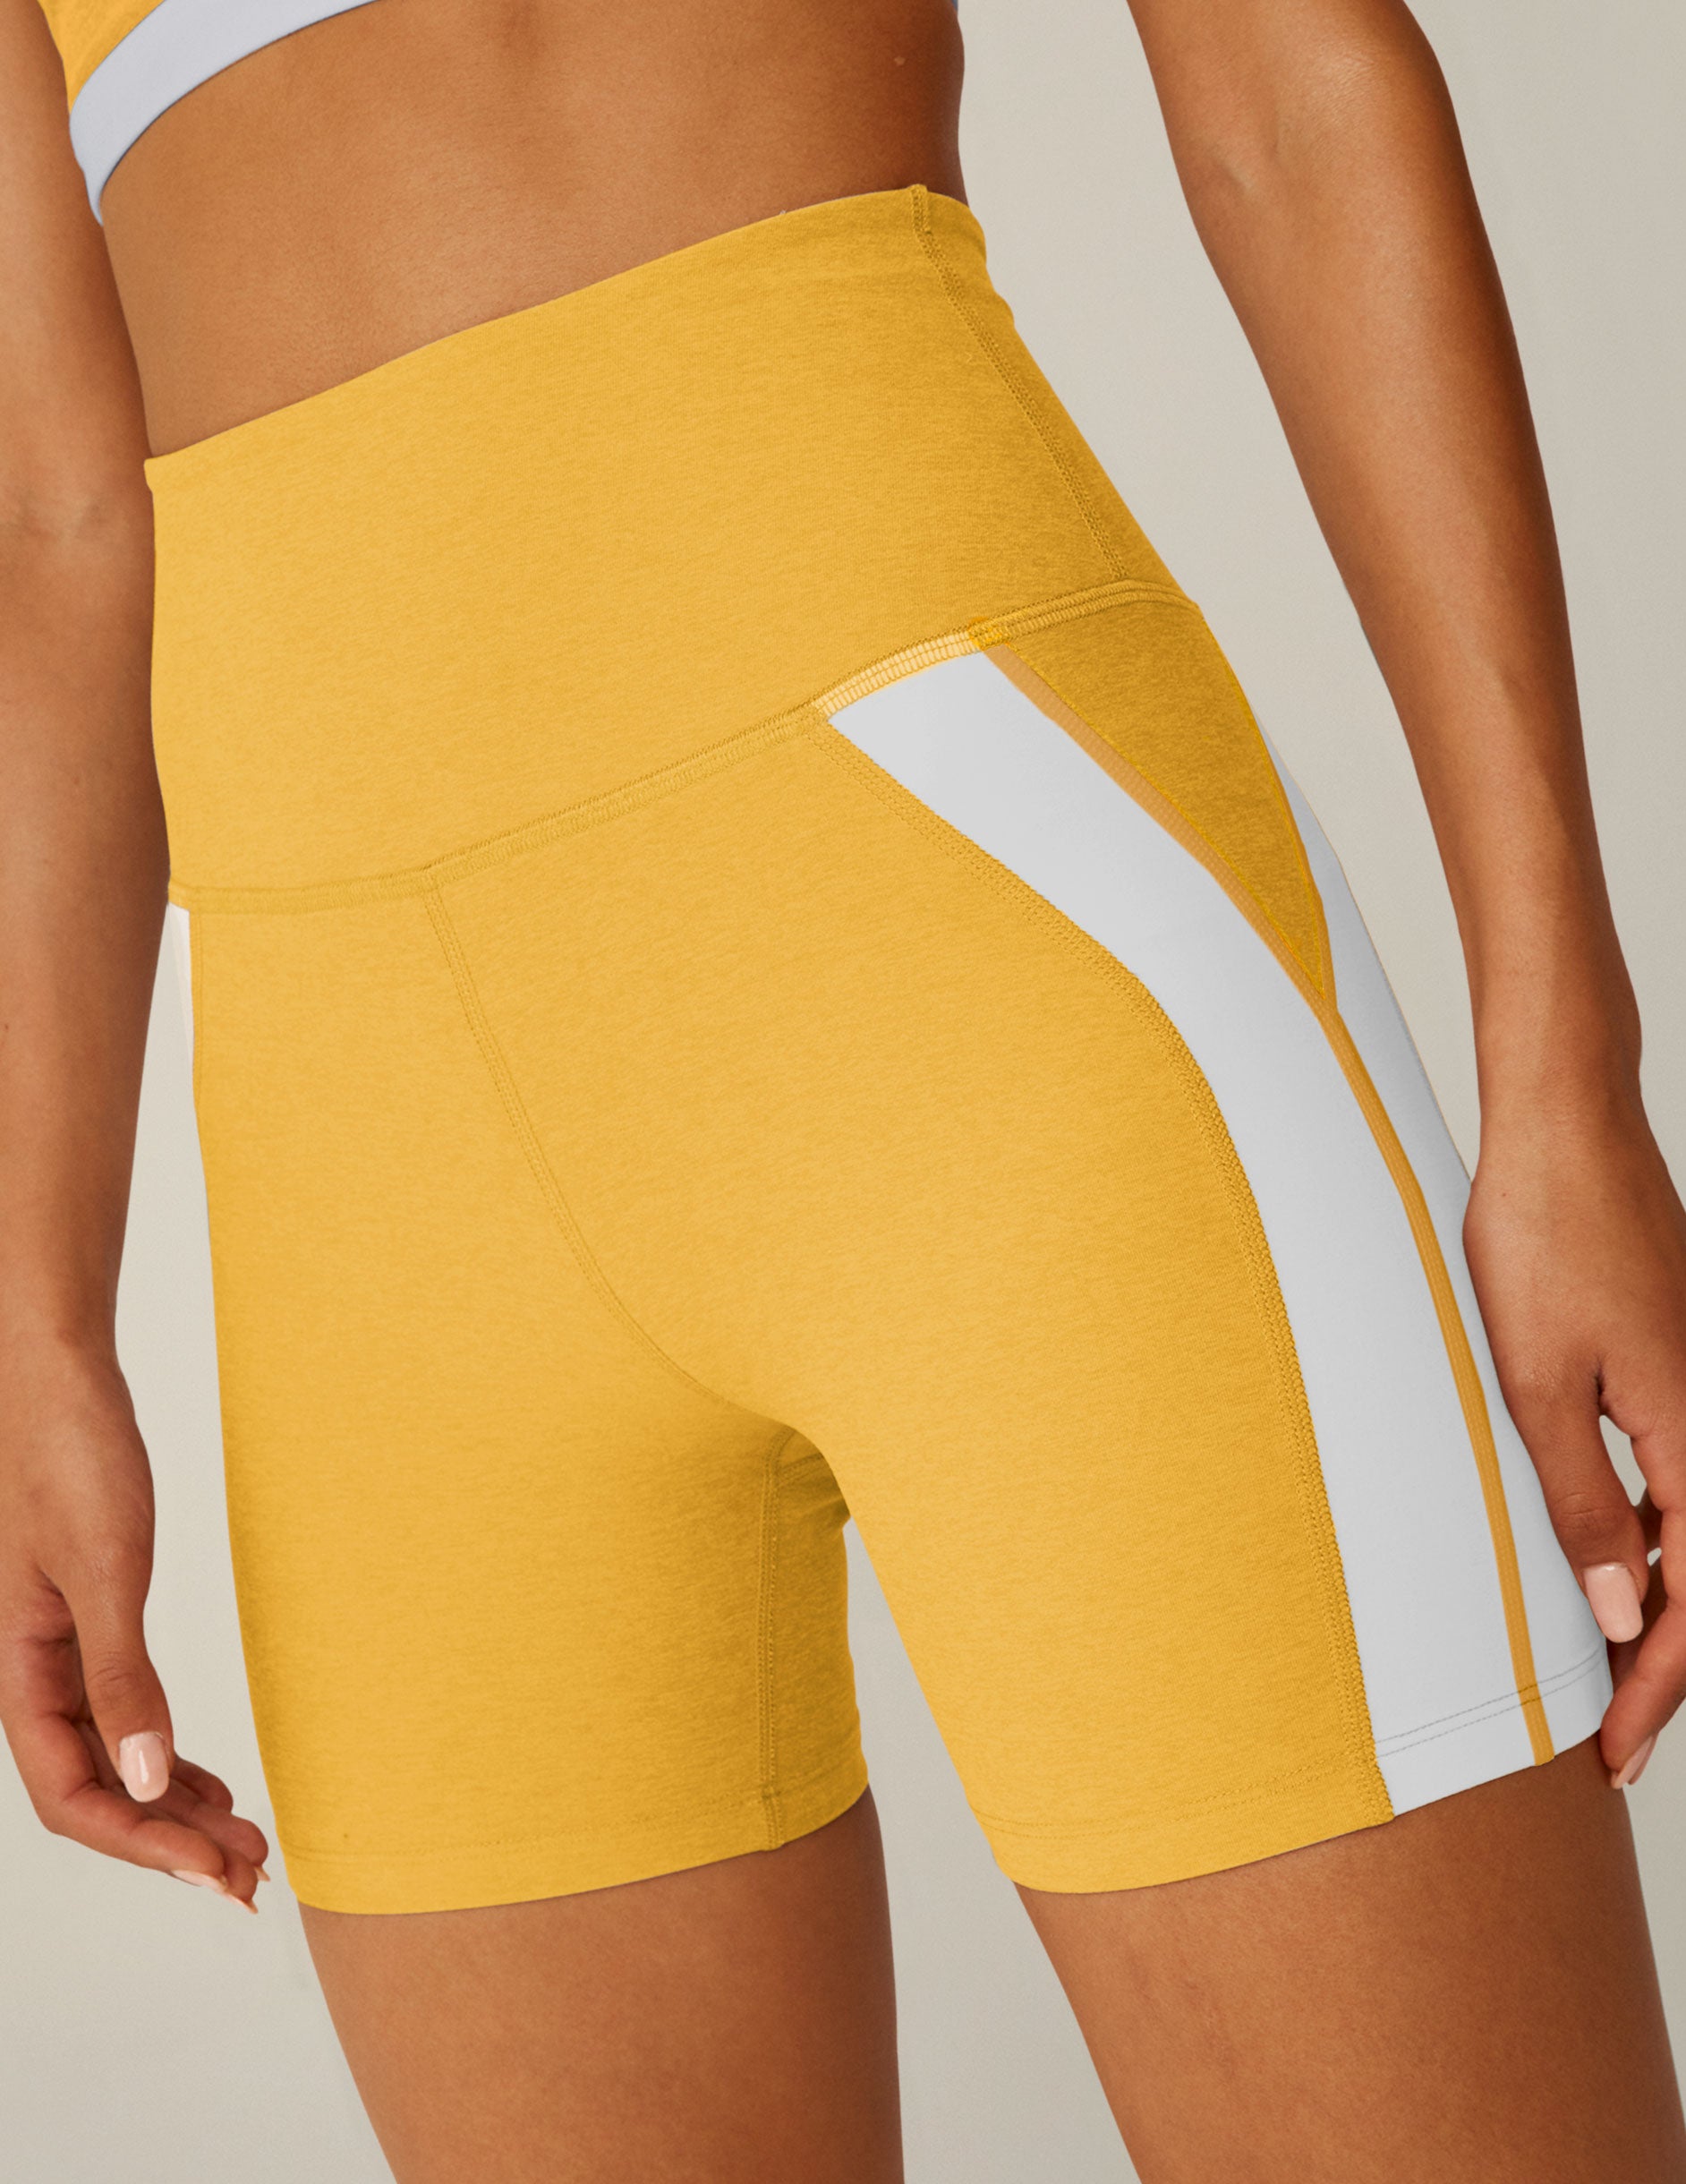 yellow high-waisted spacedye biker shorts with white lining down the sides. 